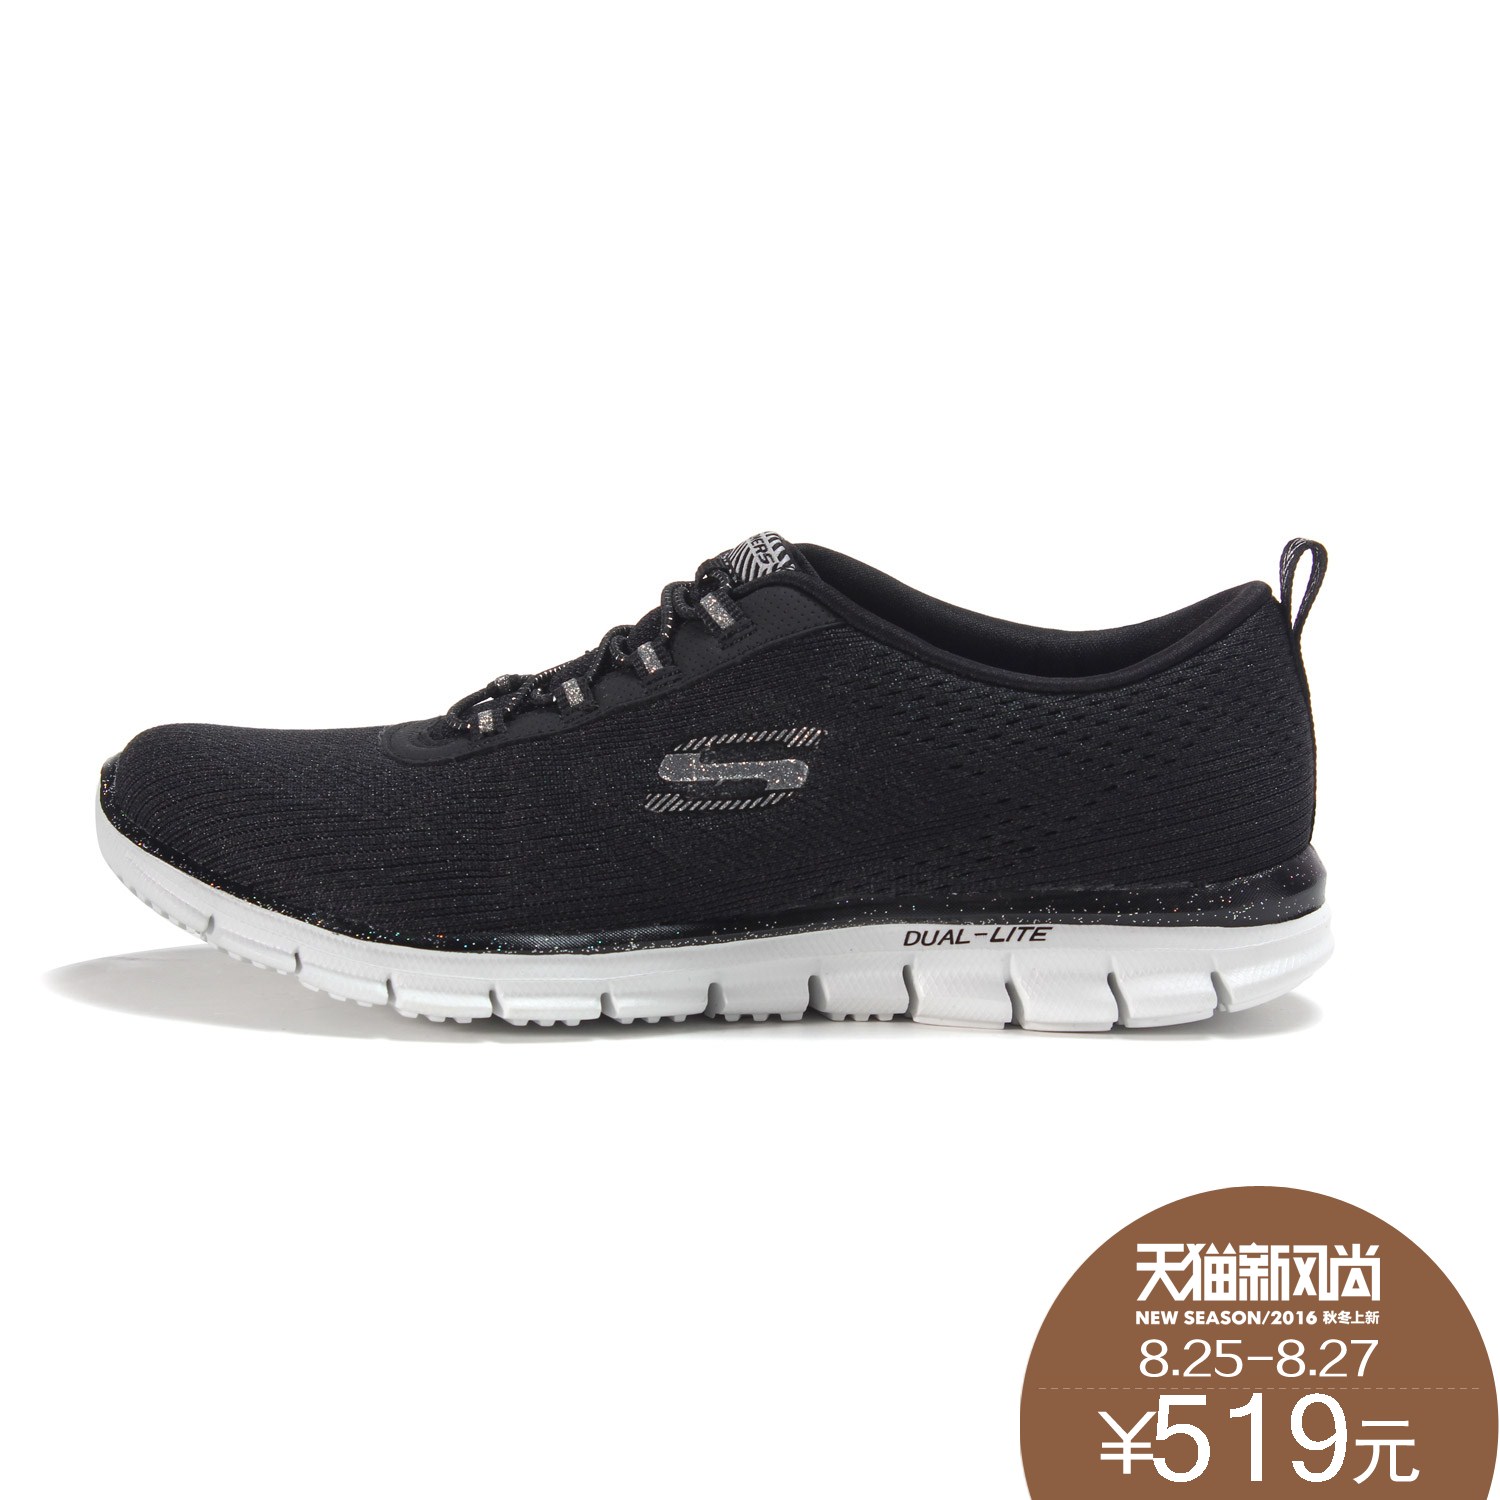 cost of skechers shoes